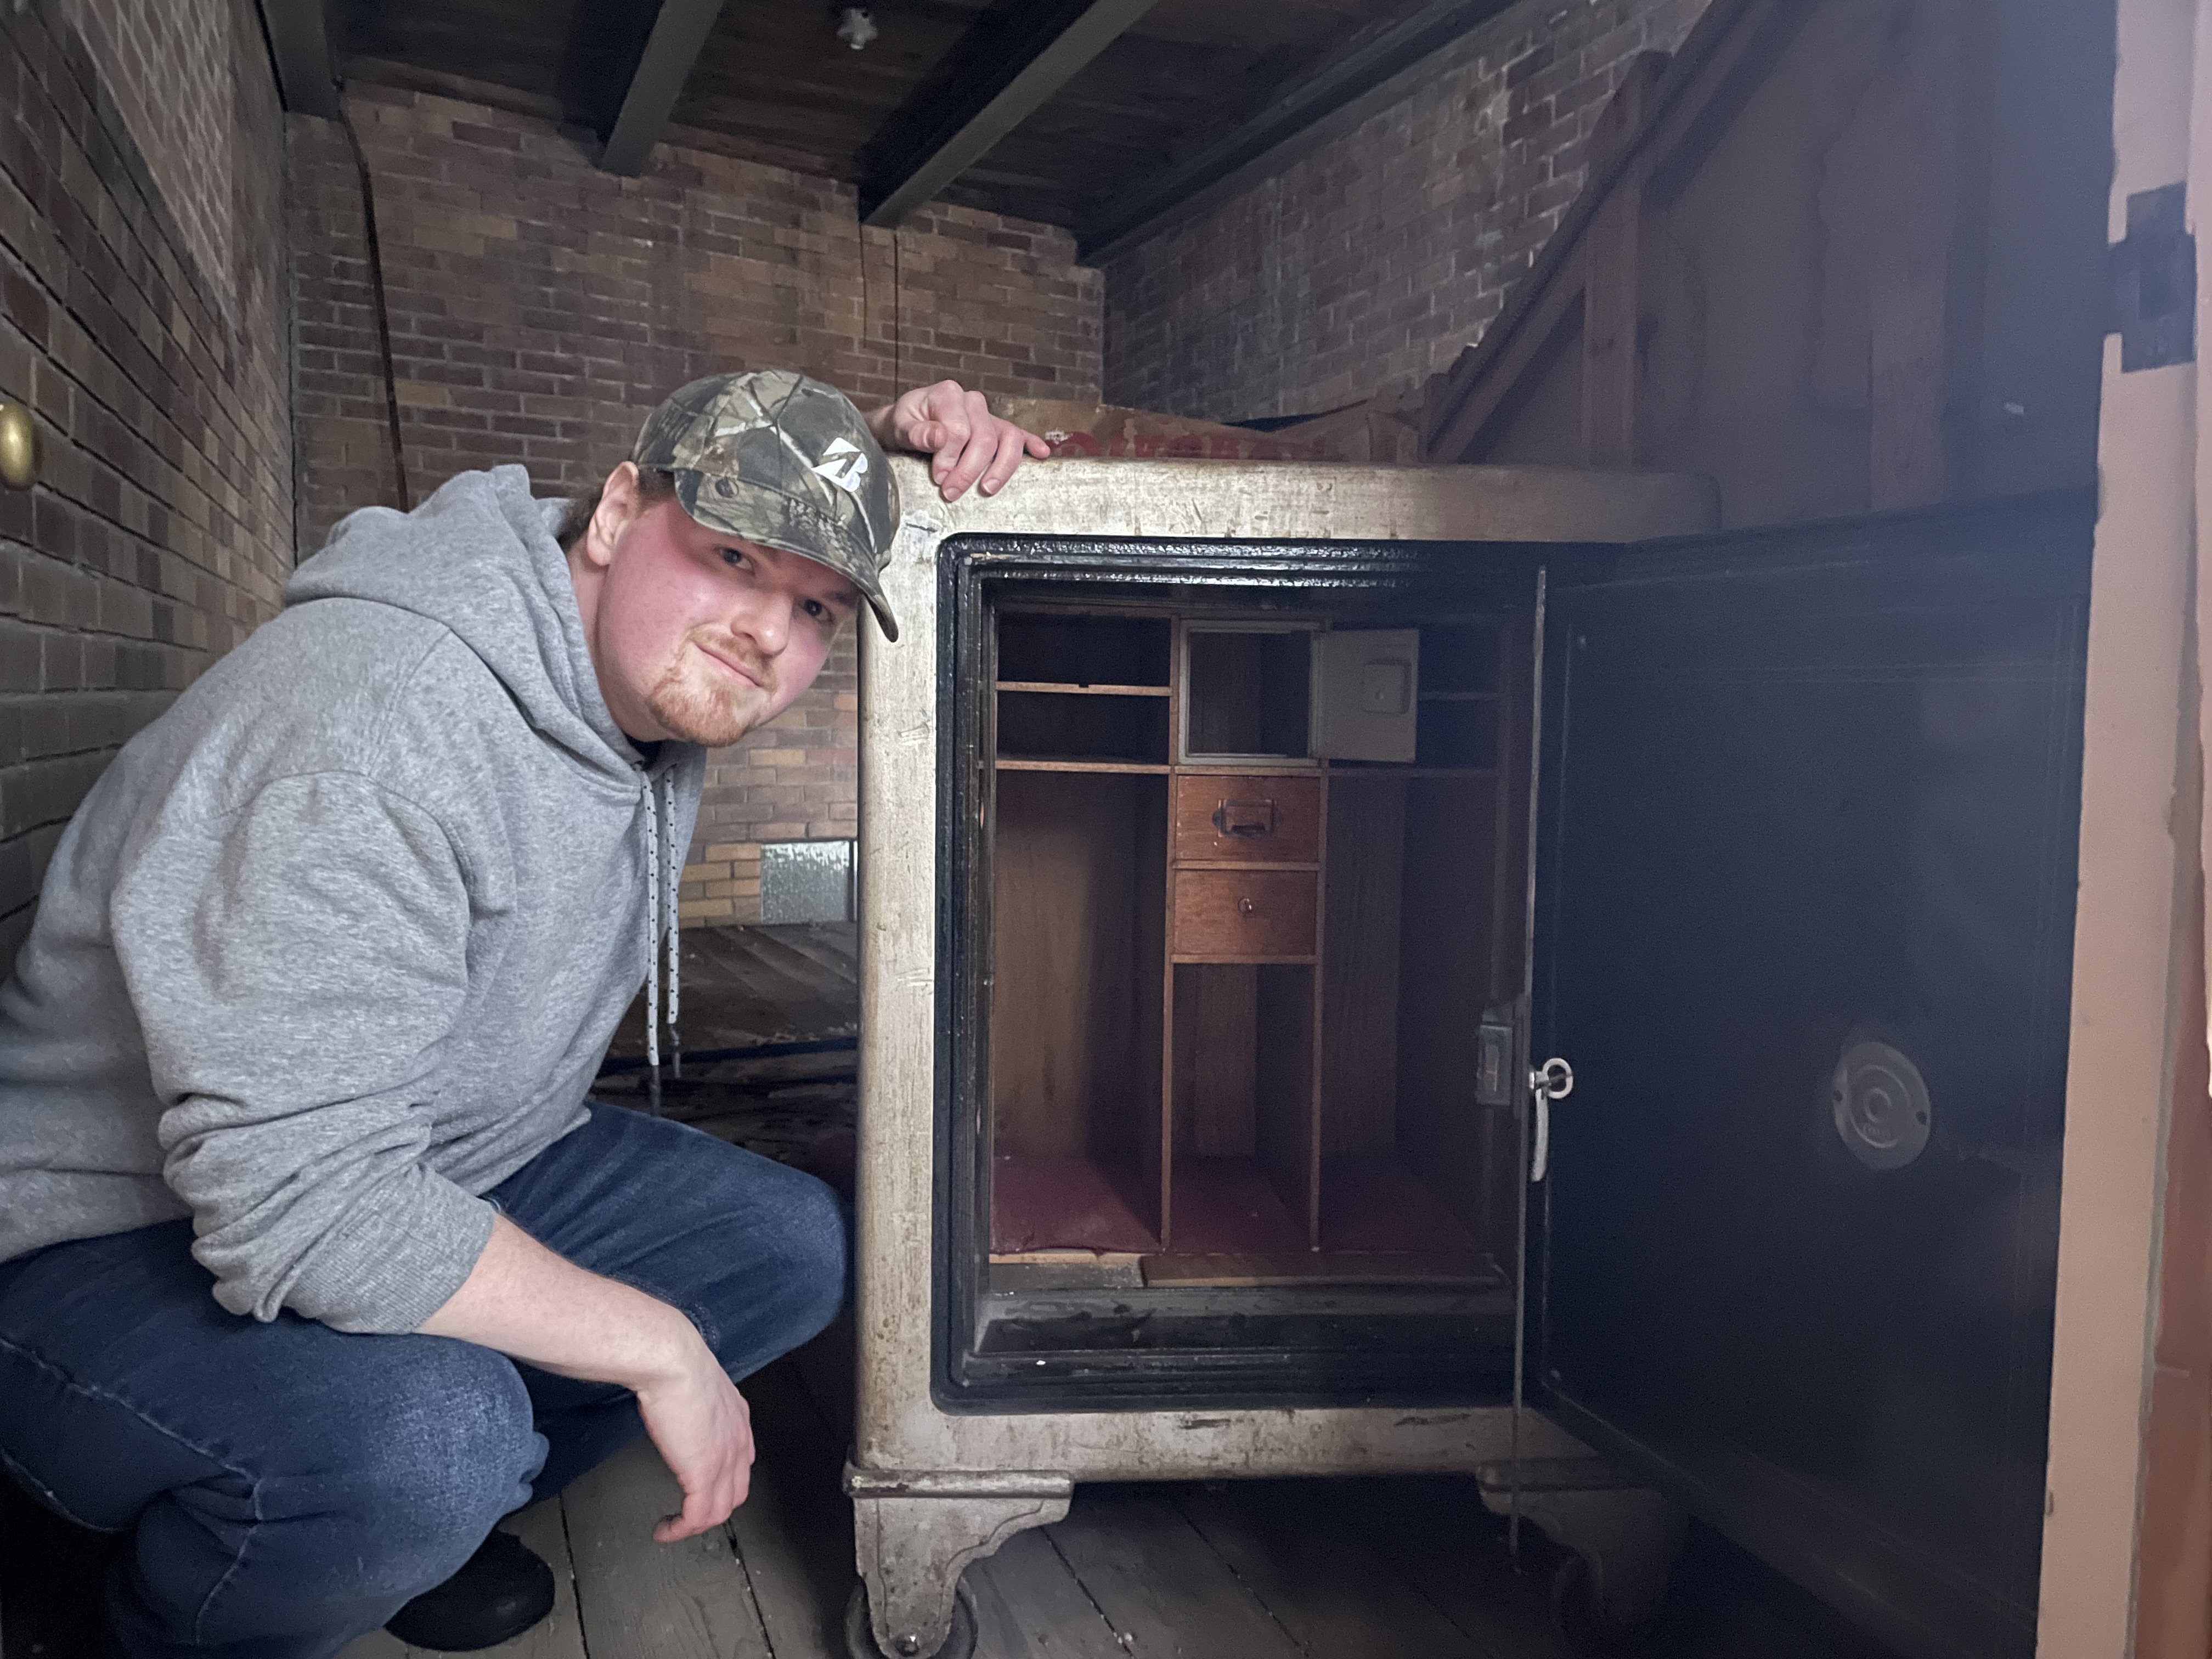 An old safe at The Parlour was finally cracked open. Here's what